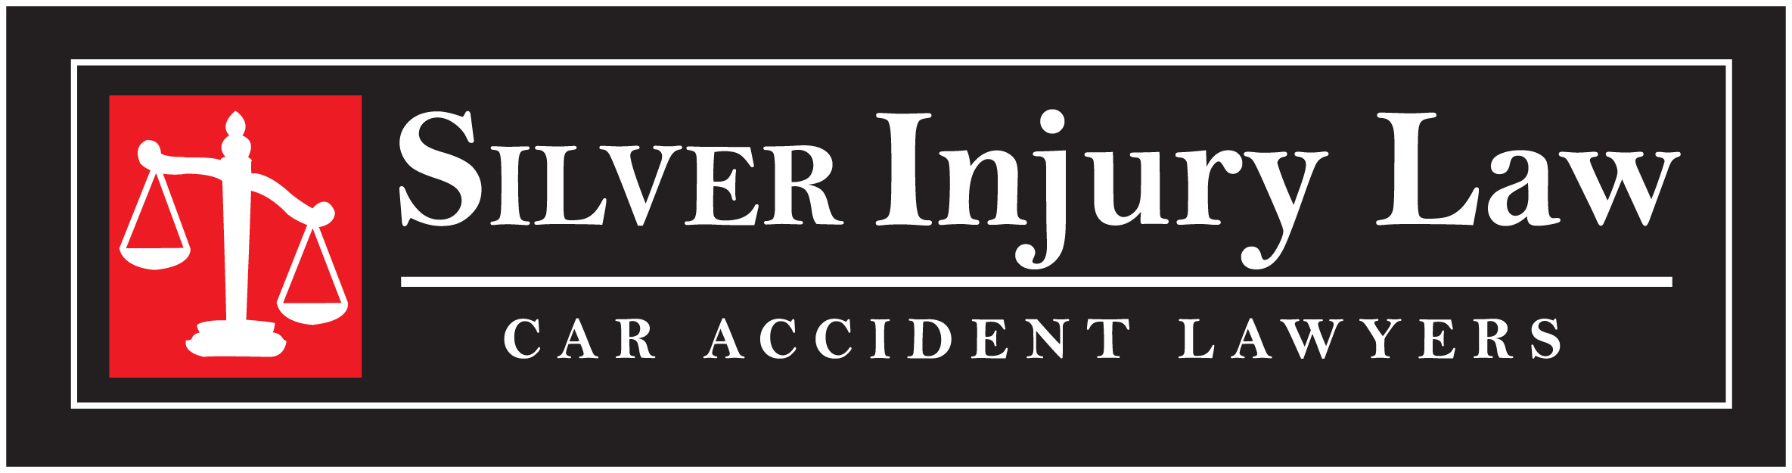 Silver Injury Law - Car Accident Attorneys